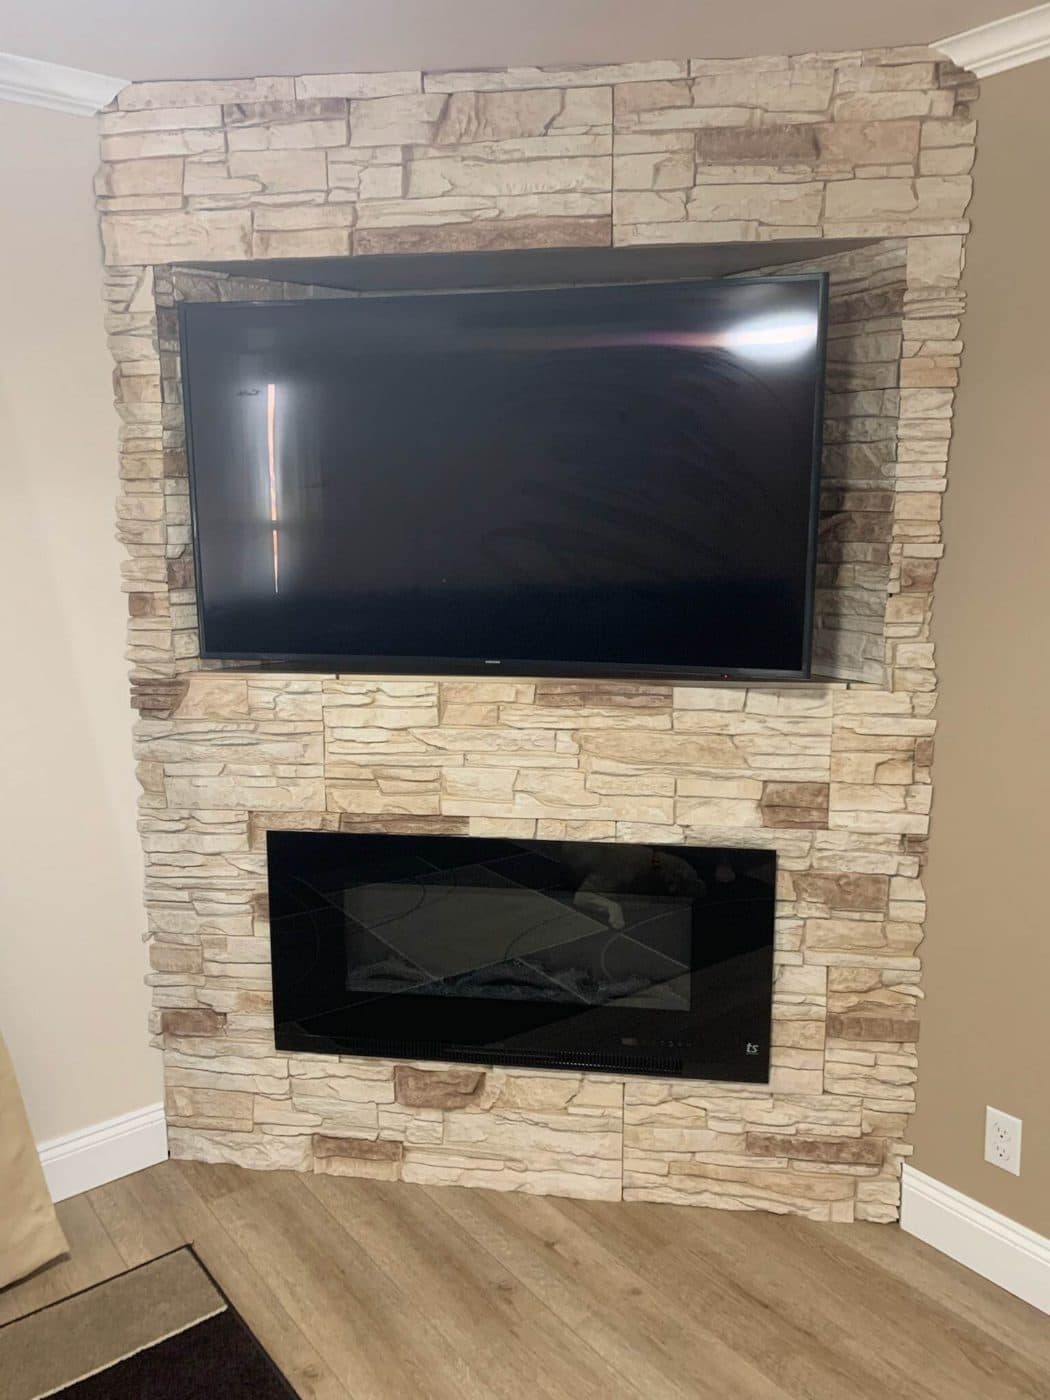 Vanilla Bean fireplace design with tv above